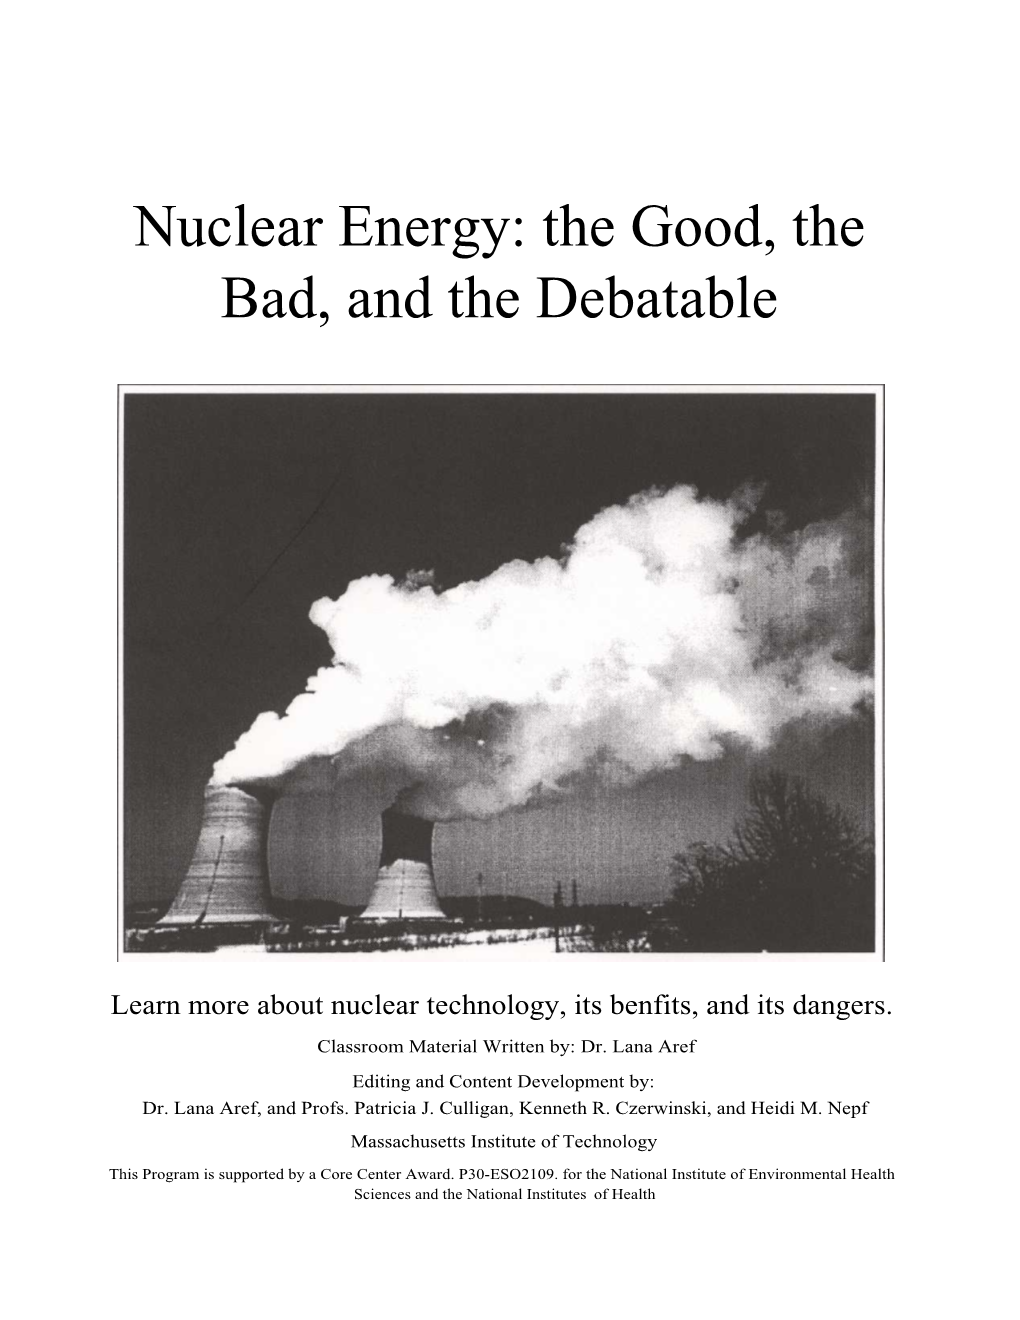 Nuclear Energy: the Good, the Bad, and the Debatable